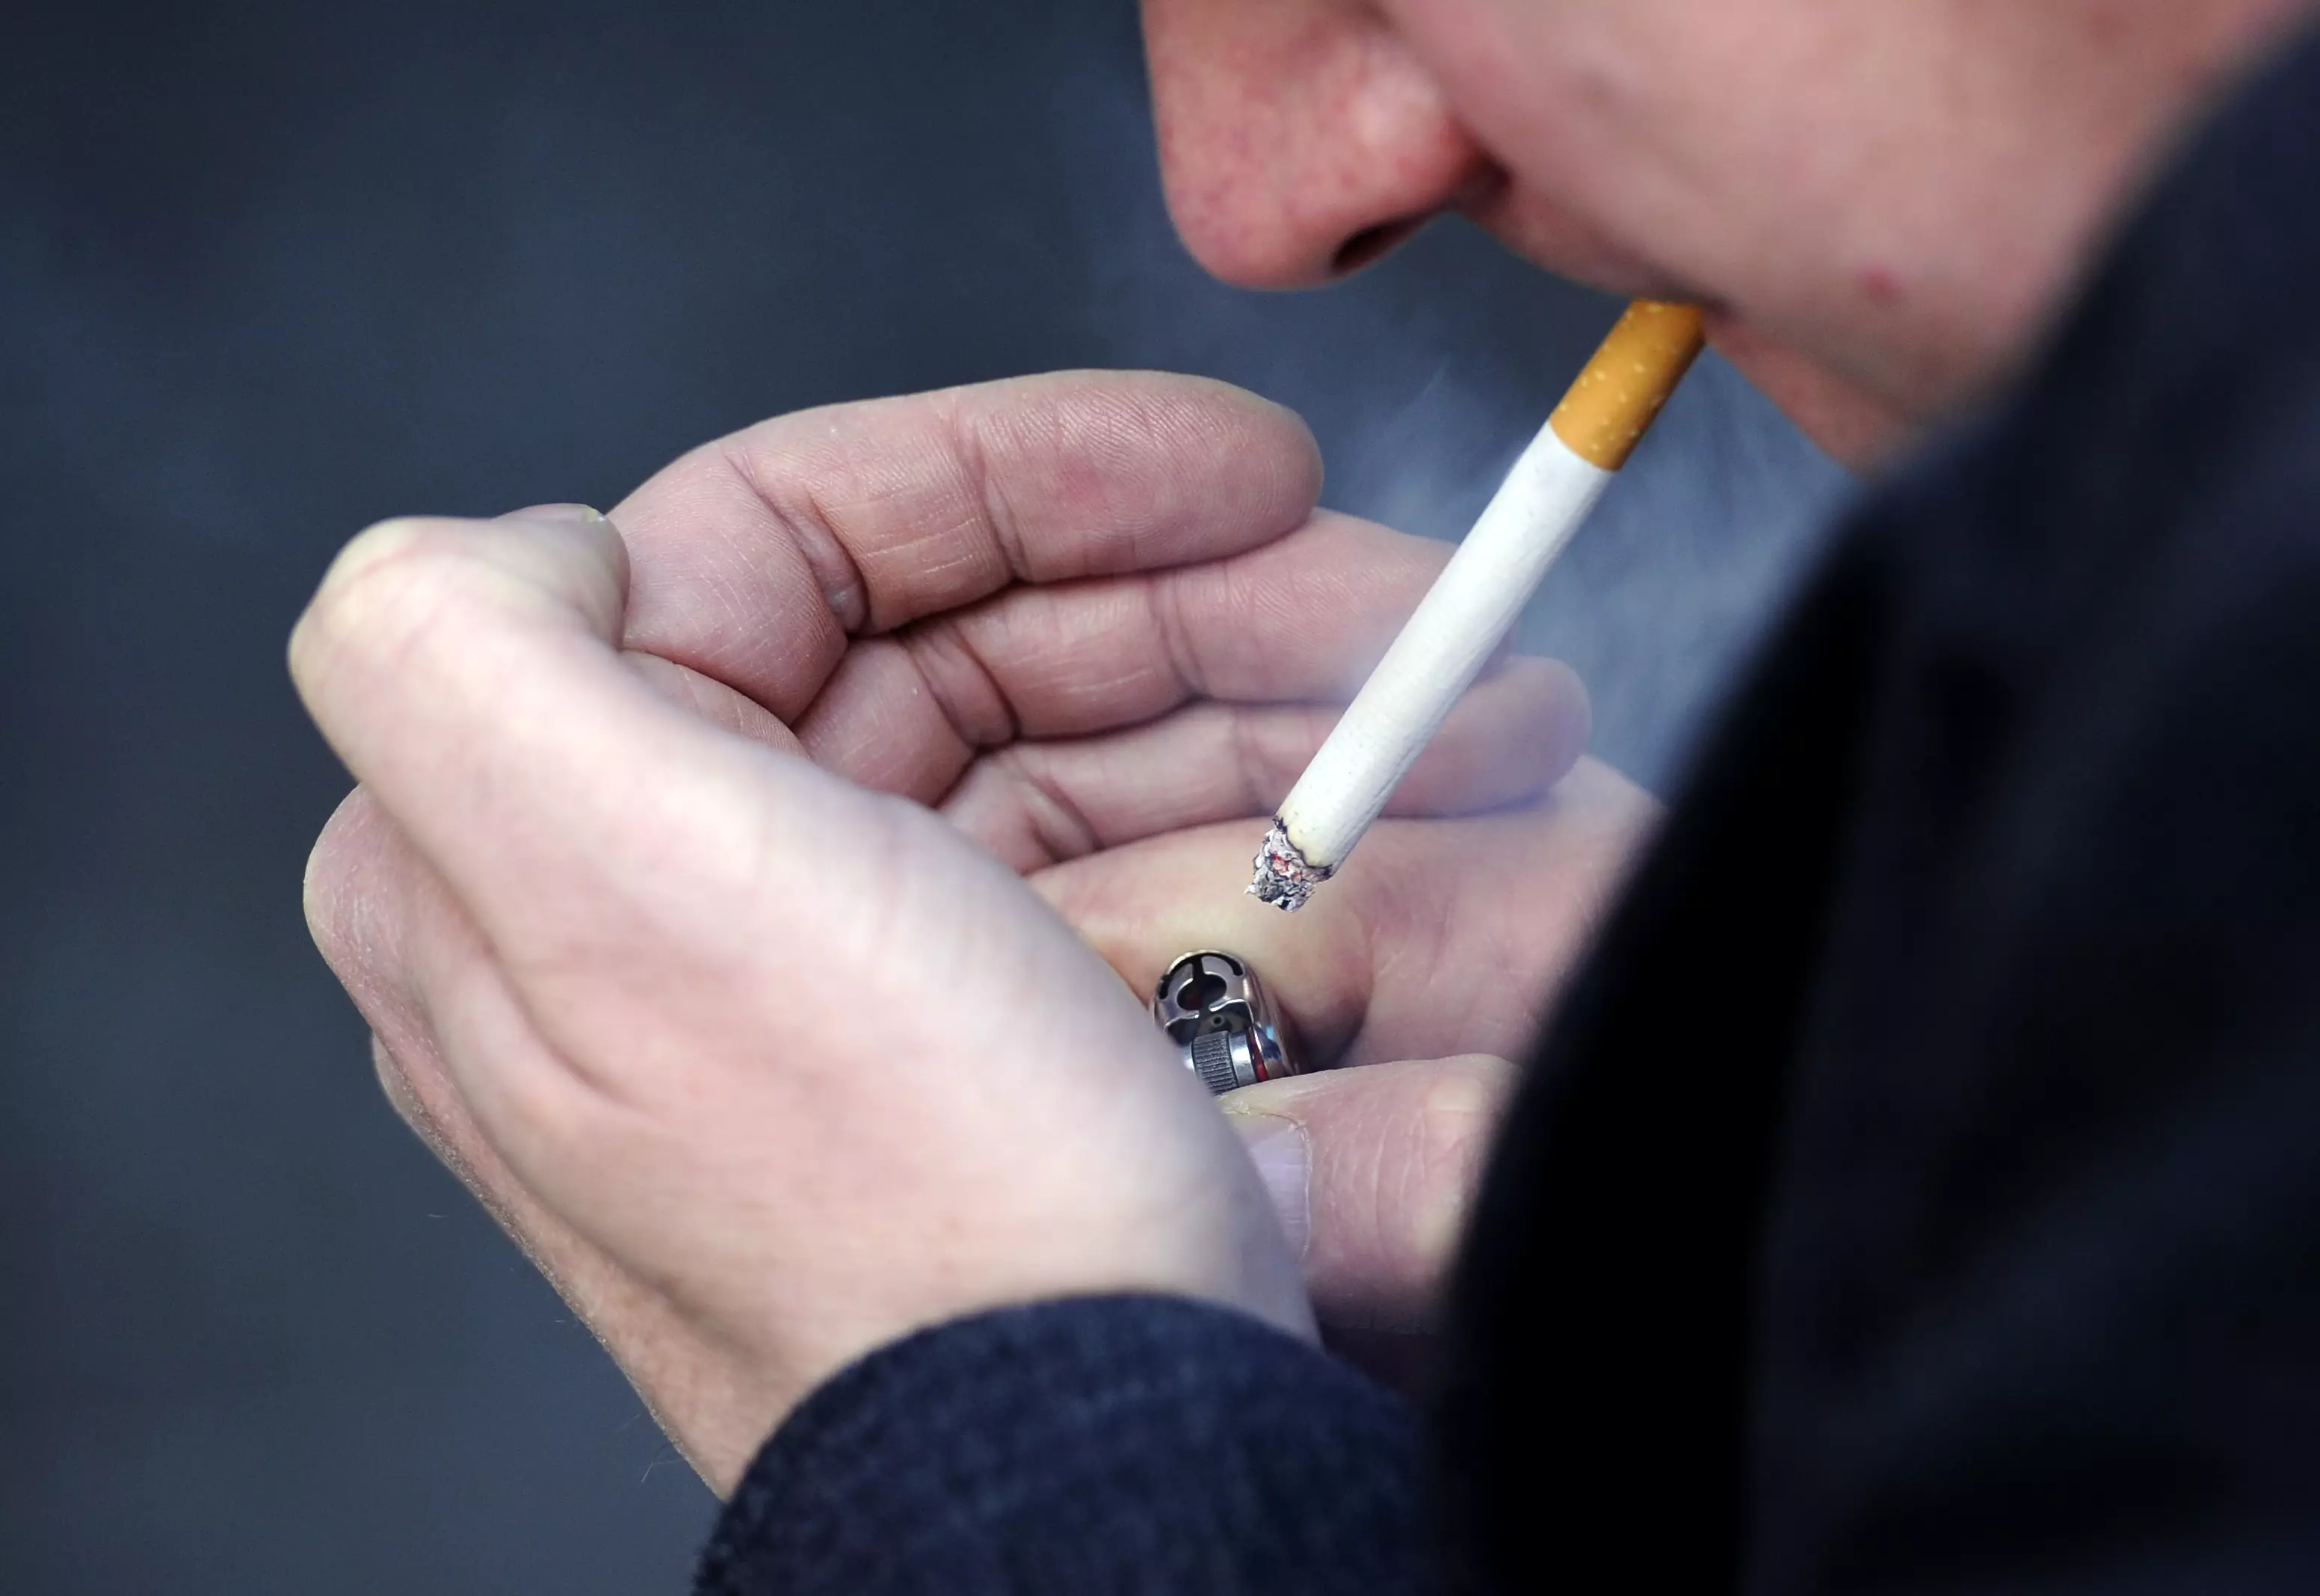 Under government plans, no one in the UK will be a smoker by 2030.